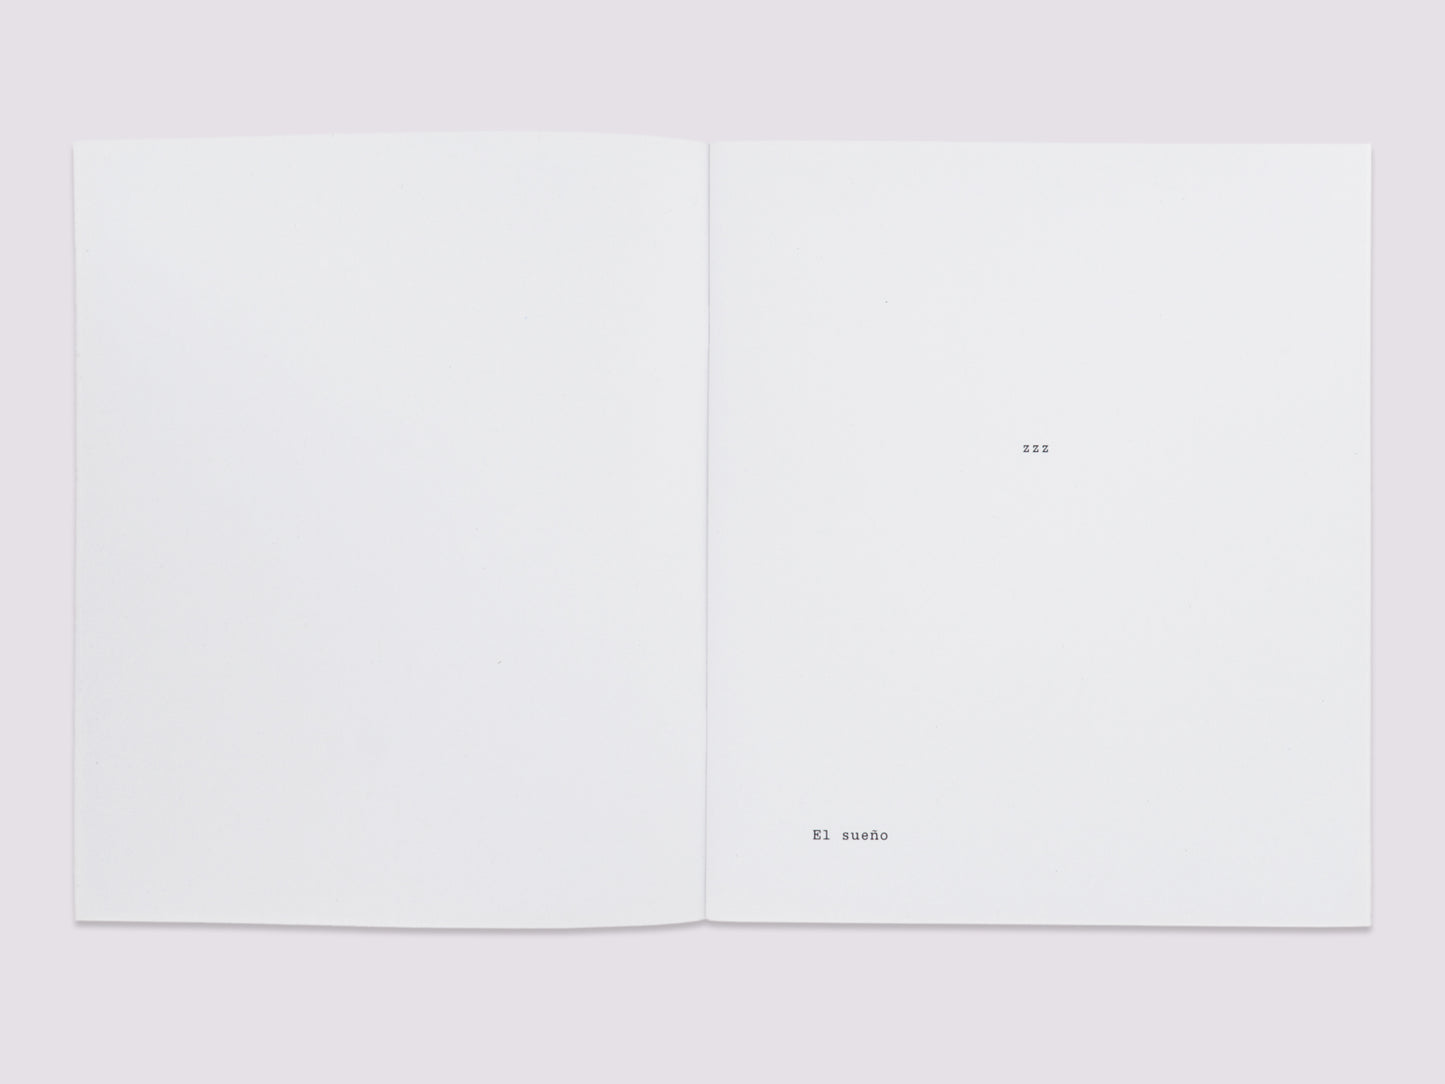 RRR/Ulises Carrión published by Boa Books